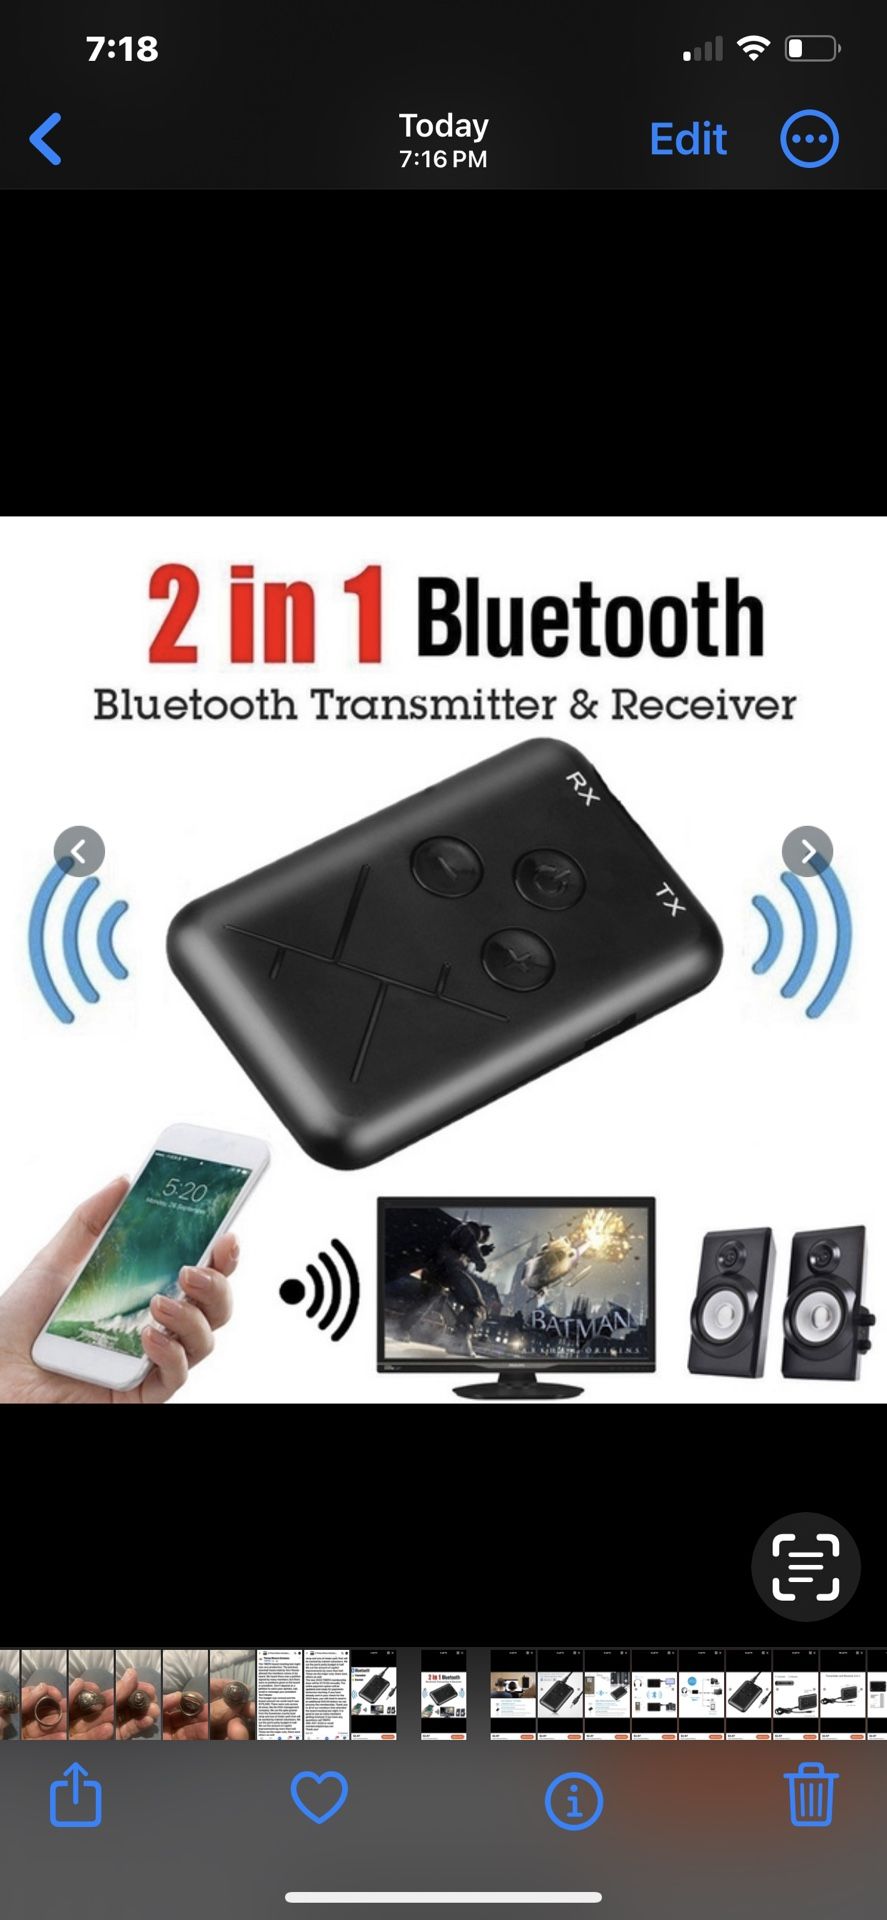 2in1 Bluetooth Transmitter Receiver 3.5mm Stereo Wireless , built in 200mAh Battery, Music Audio Cable Dongle Bluetooth V4.2 Adapter for TV DVD Mp3 PC